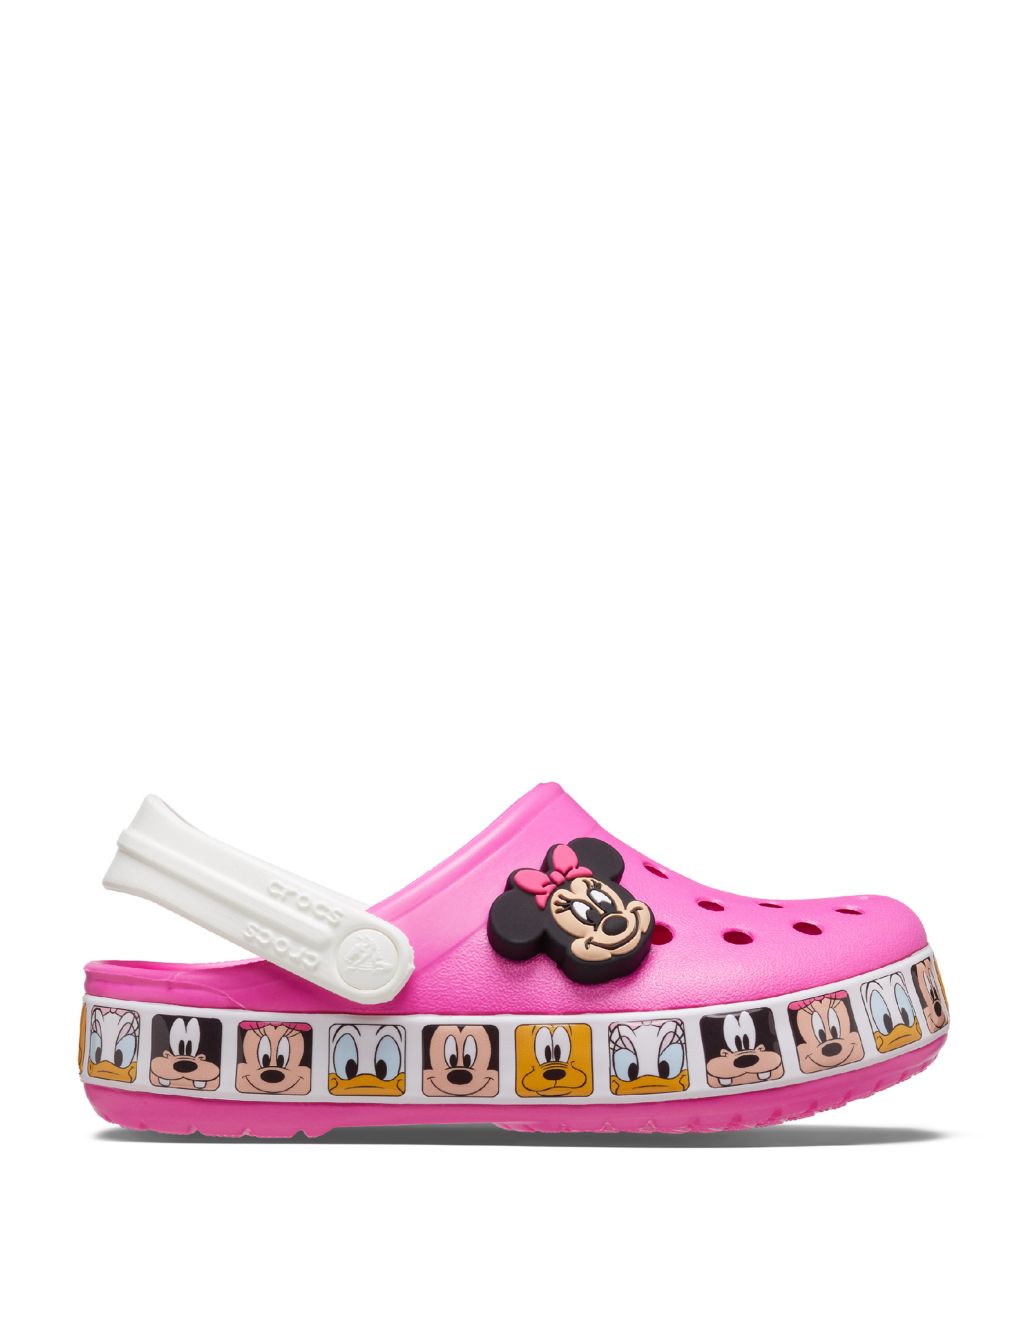 Kids' Minnie Mouse™ Clogs (4 Small - 10 Small) image 1